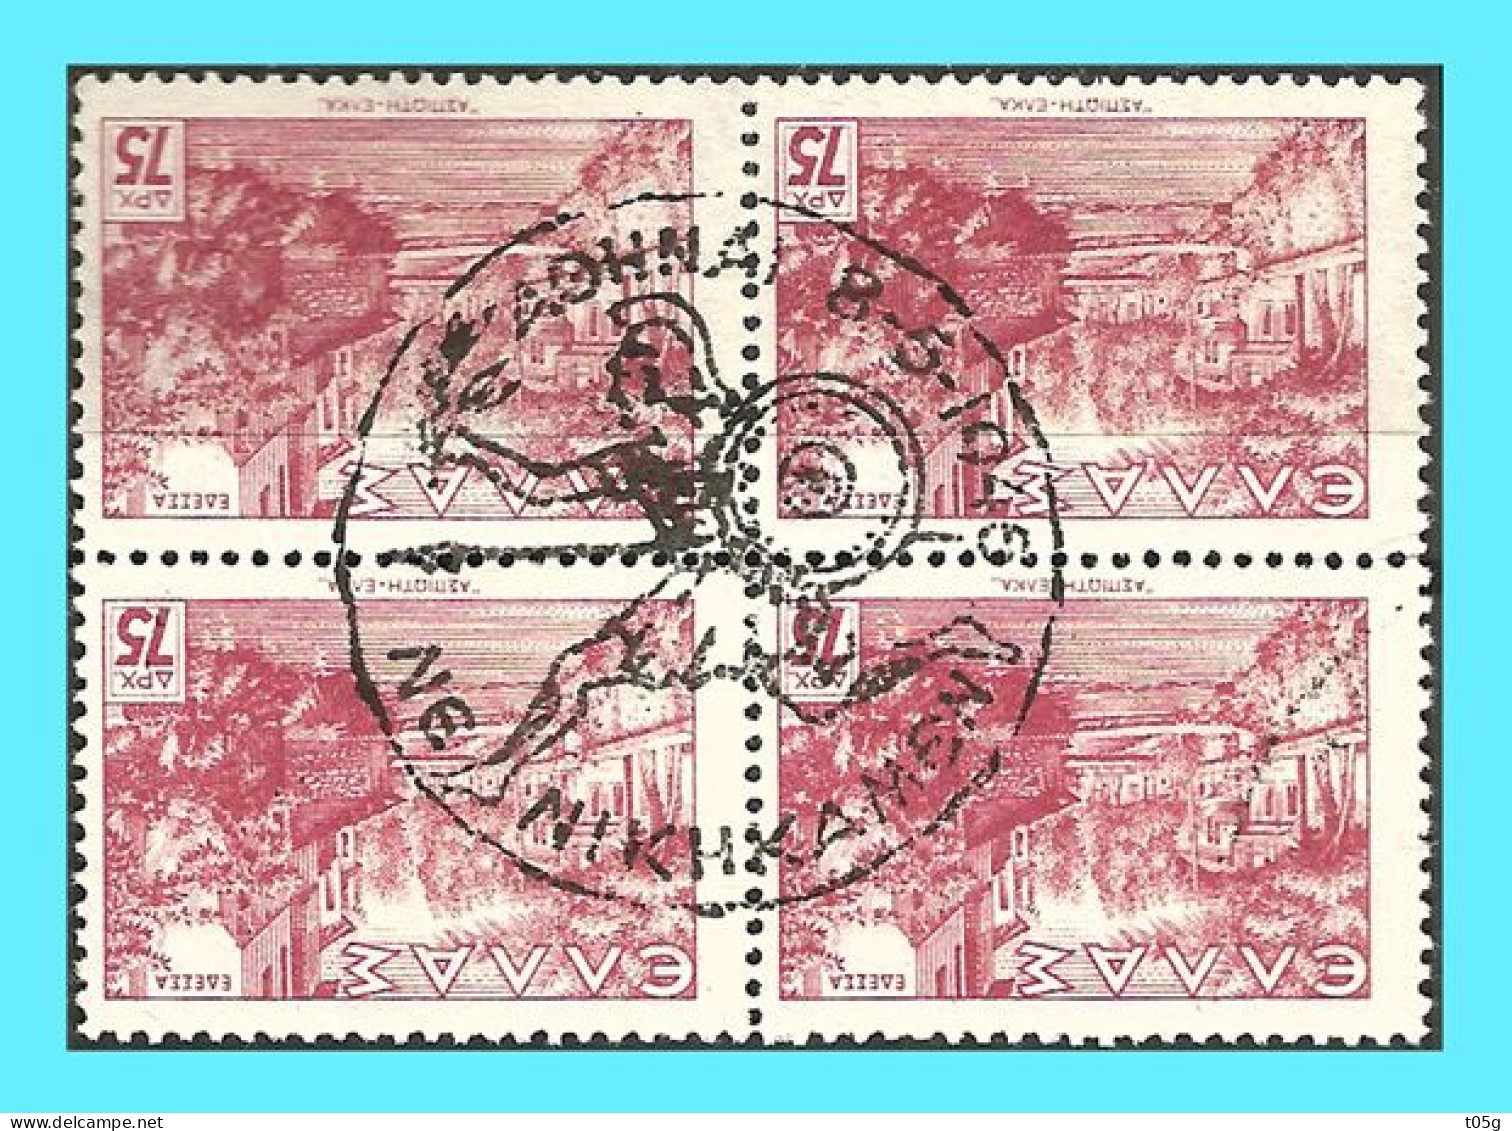 GREECE- GRECE-HELLAS 1944: with Comm. Cancell. (ATHENS 8. 5. 1948 NENIKIKAMEN) - Used Stamps